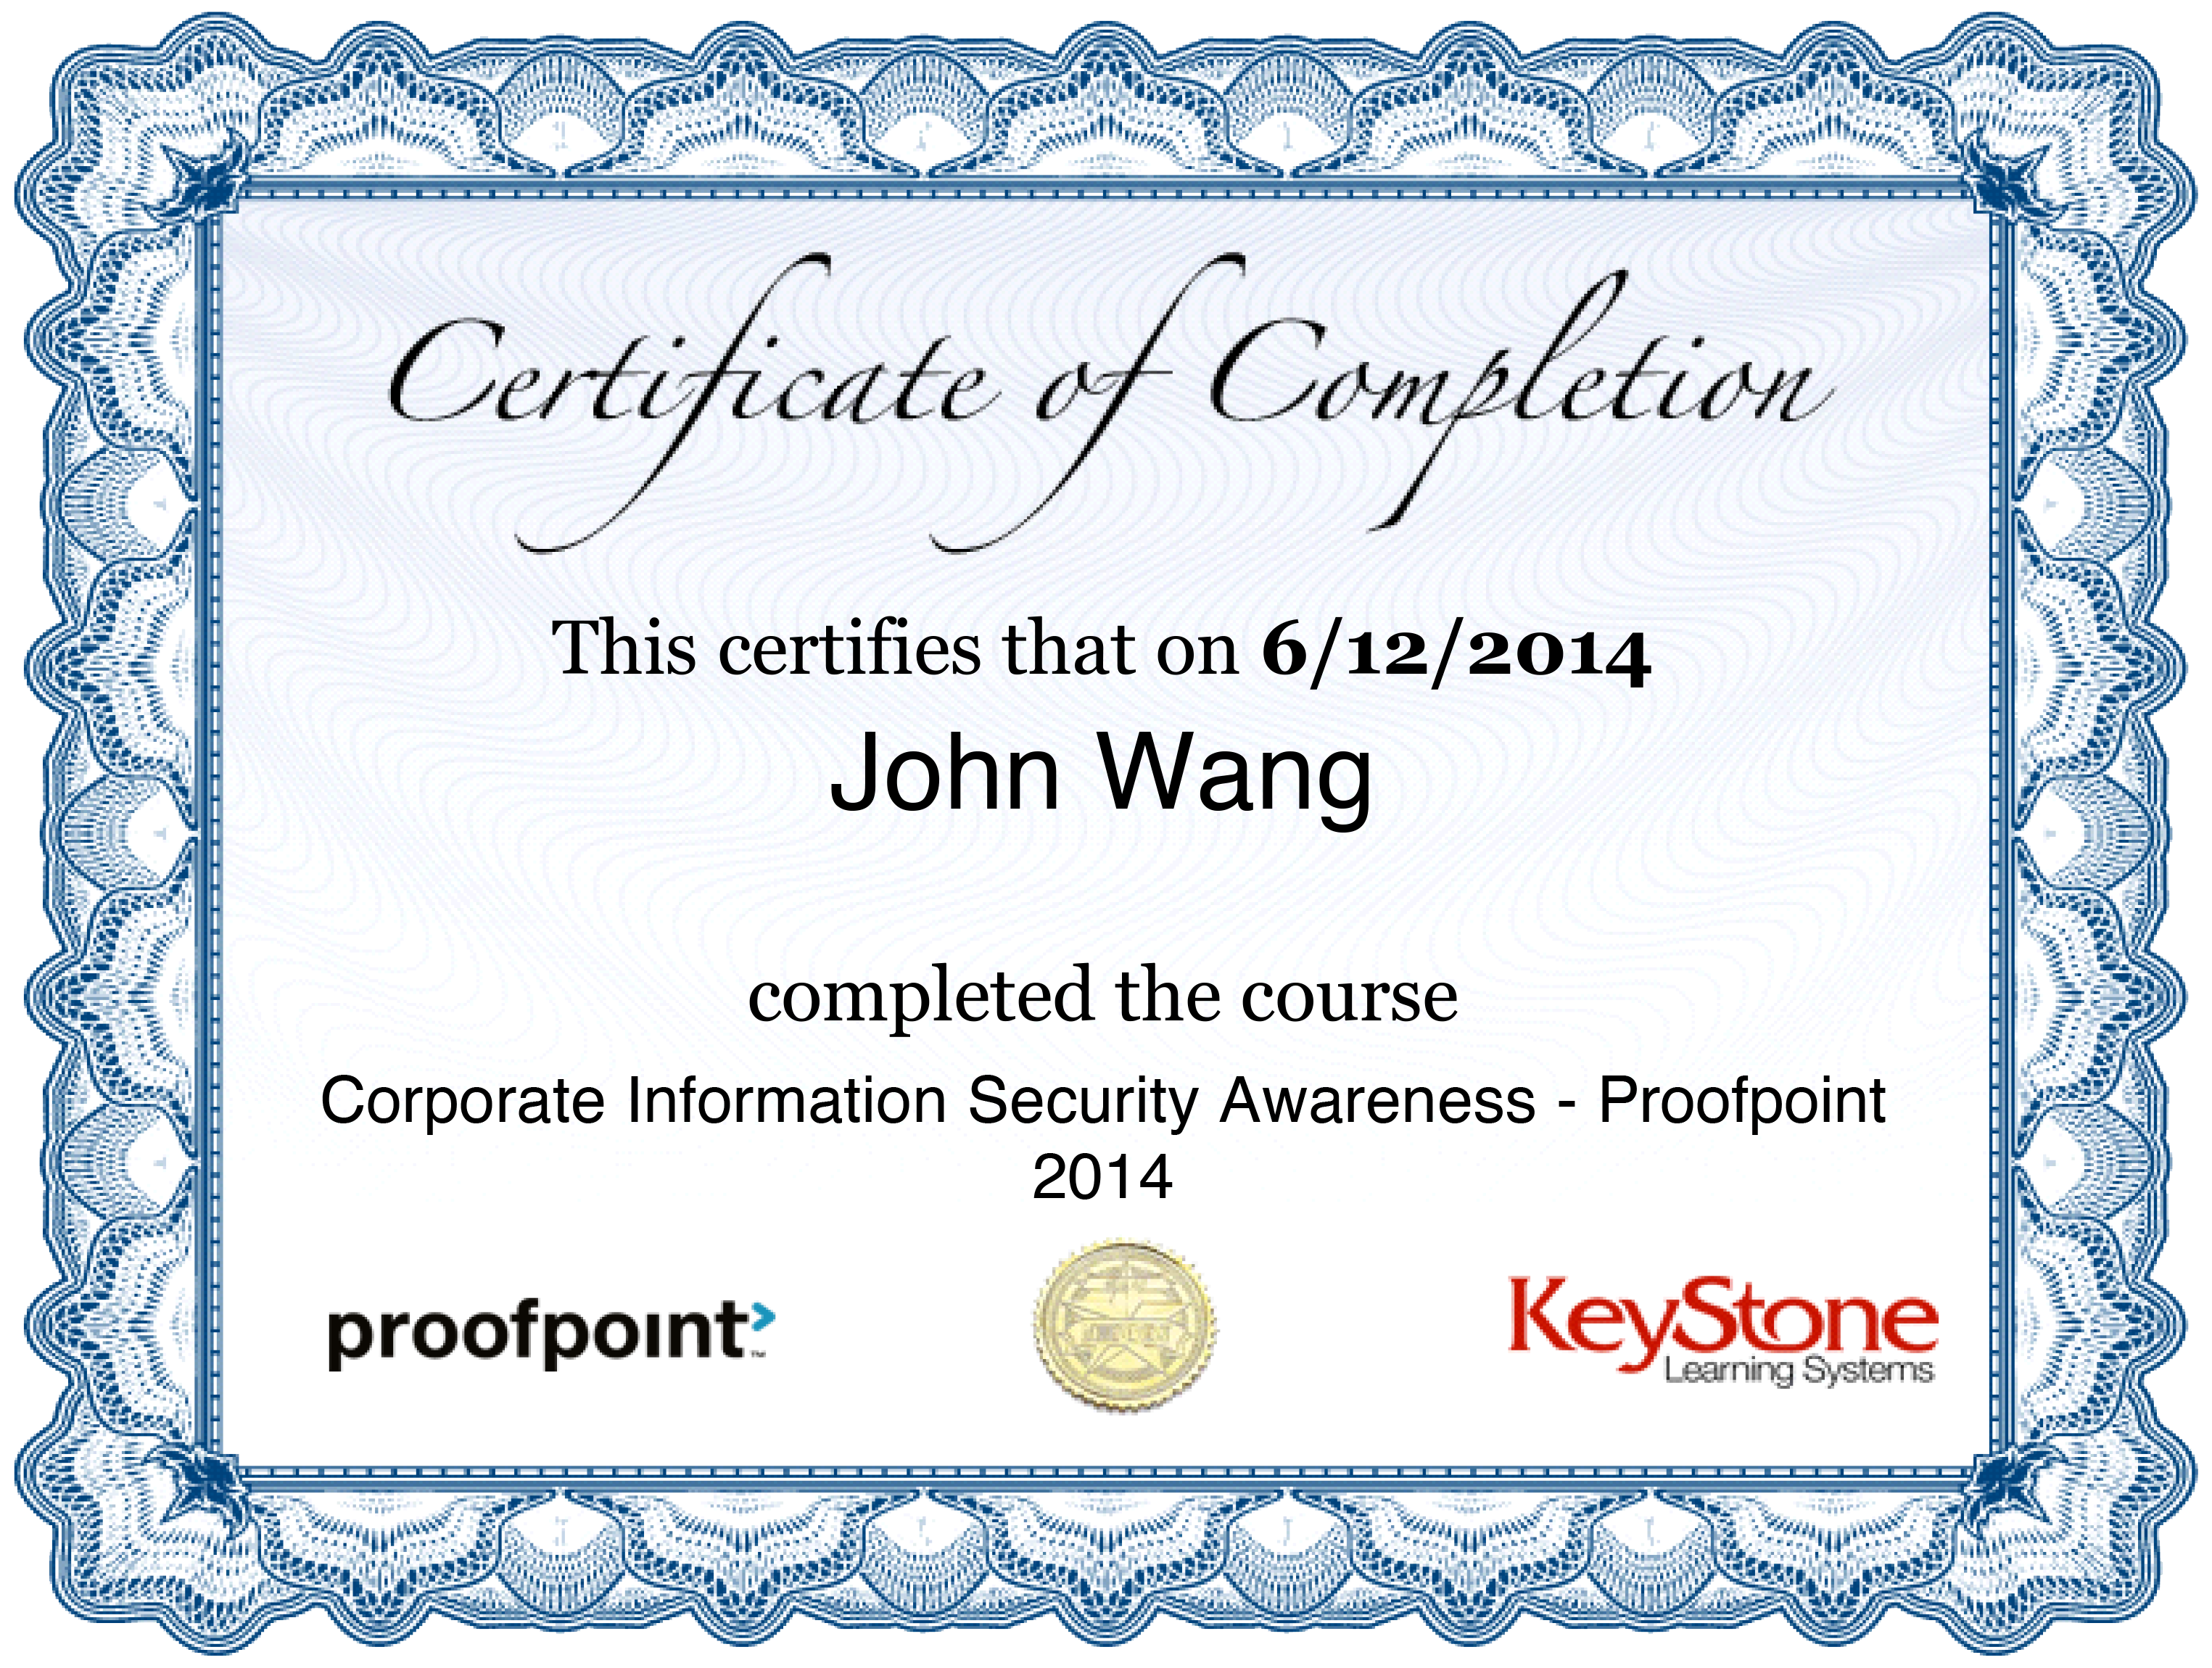 John's Corporate Information Security Awareness from Proofpoint